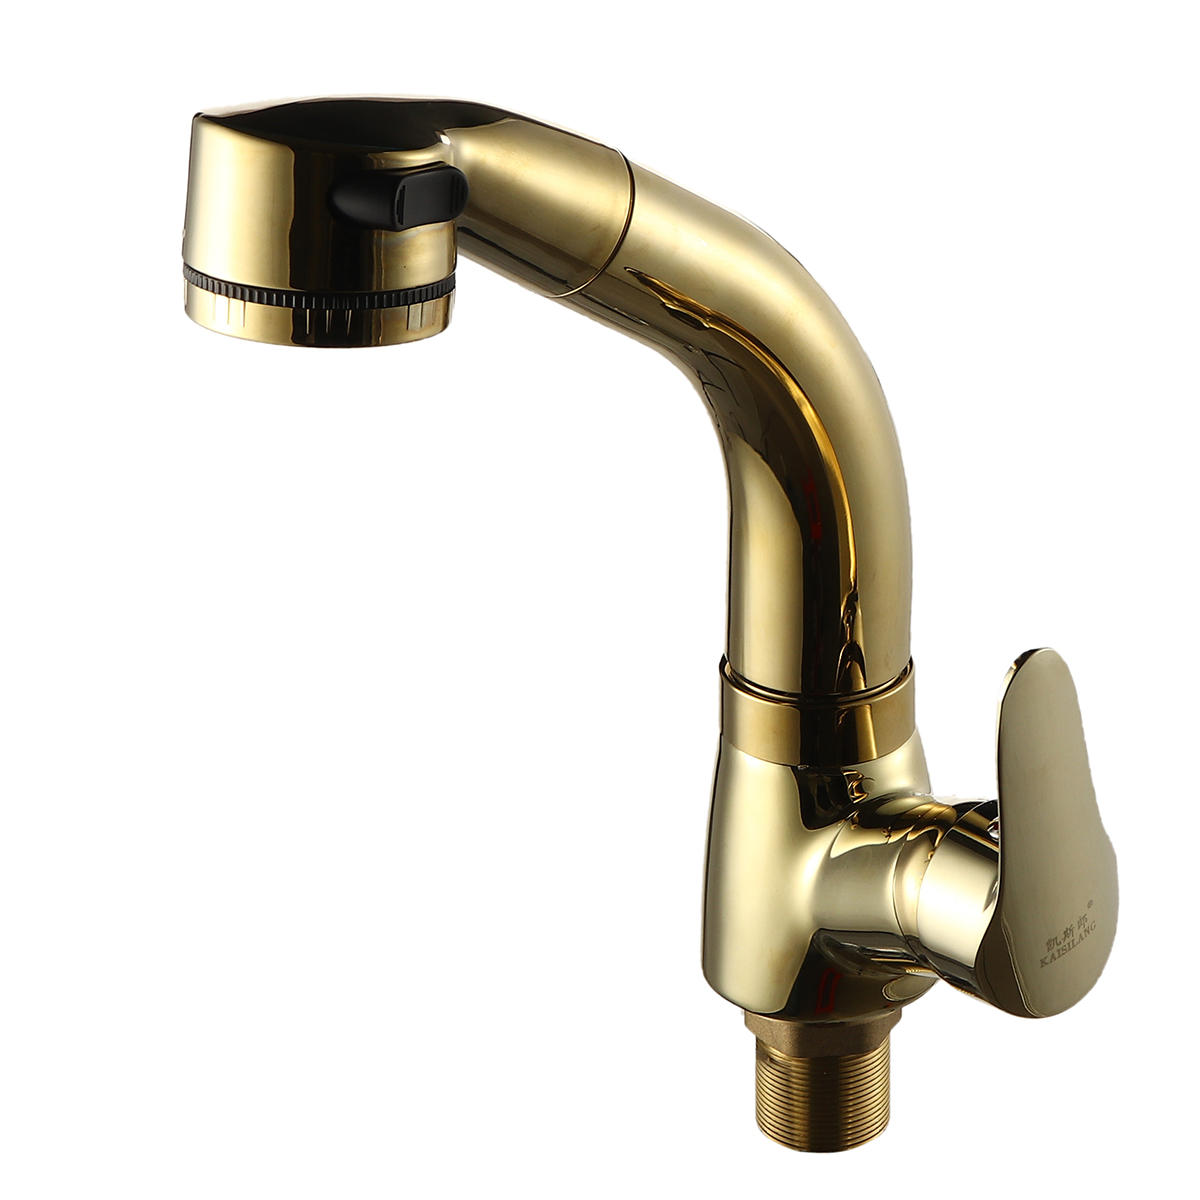 Image of Kitchen Sink Faucet Pull Out Rotation Spray Mixer Liftable Cold And Hot Water Faucet